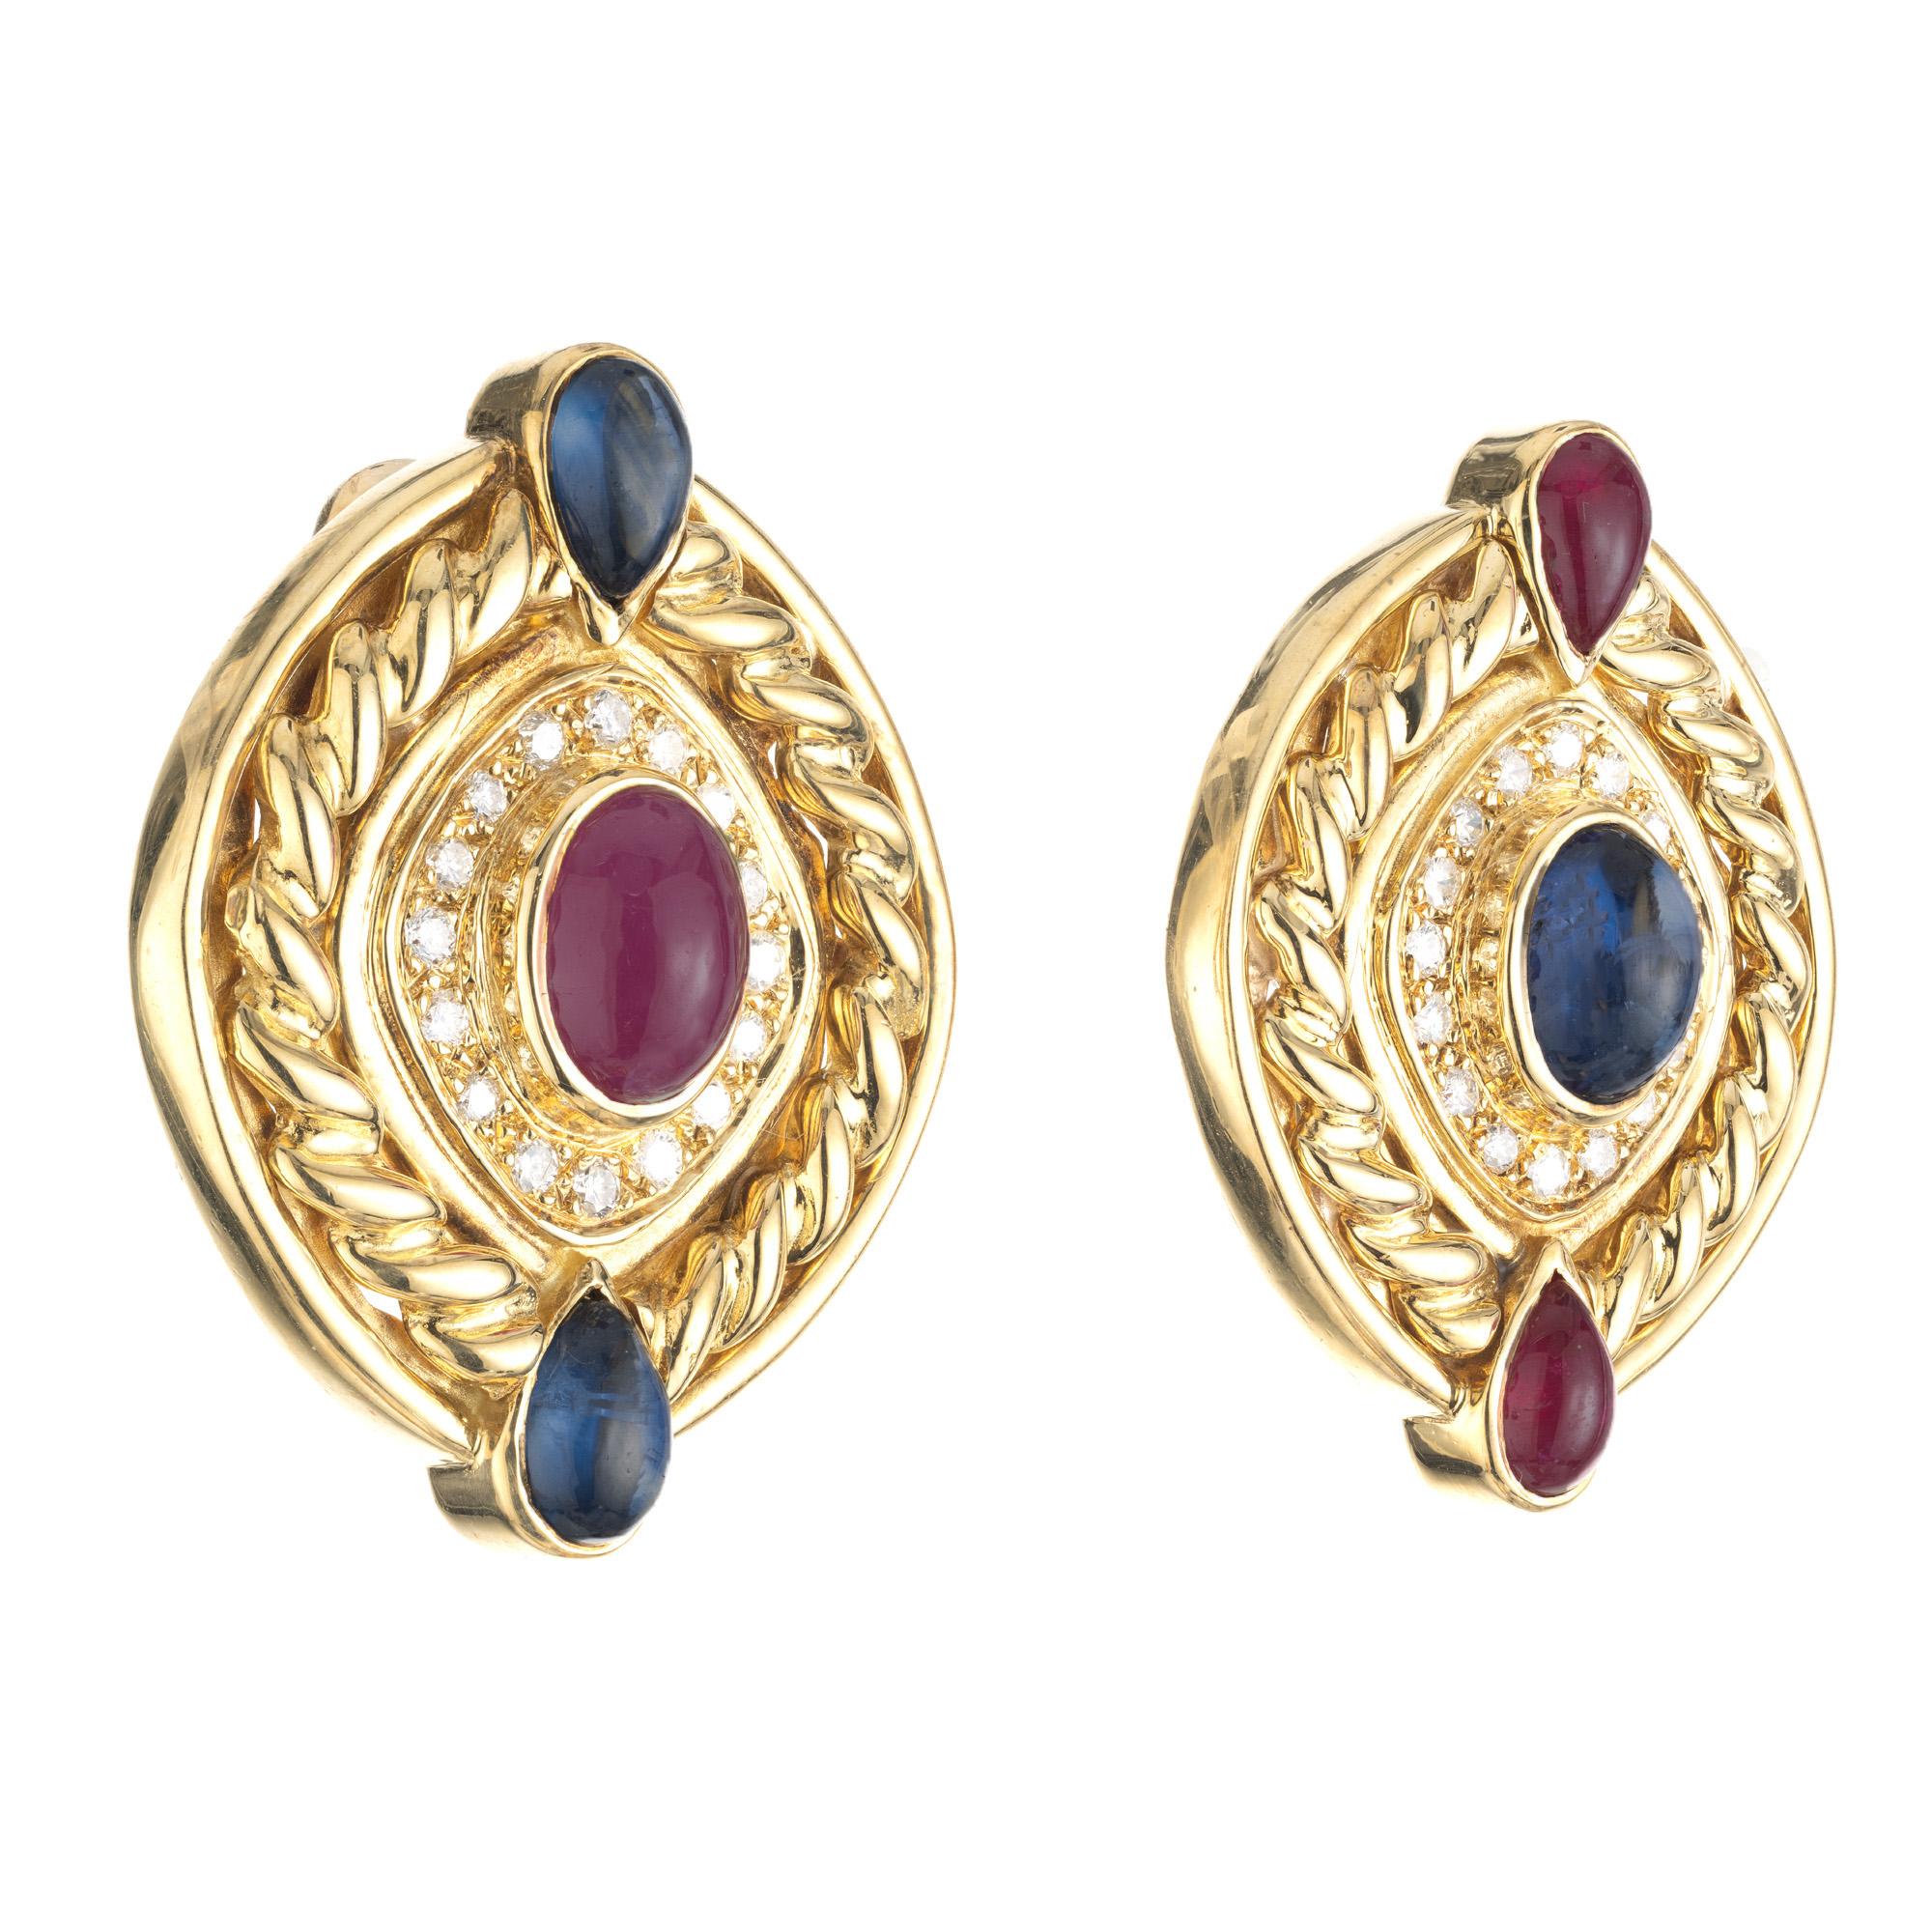 Mid-Century 1950's Heavy swirl clip post earrings. These large 18k yellow gold earrings consist of a total of 6 cabochon stones, 3 rubies and 3 sapphires. Each center stone is accented with a halo of full cut diamonds. True example of the 1980's